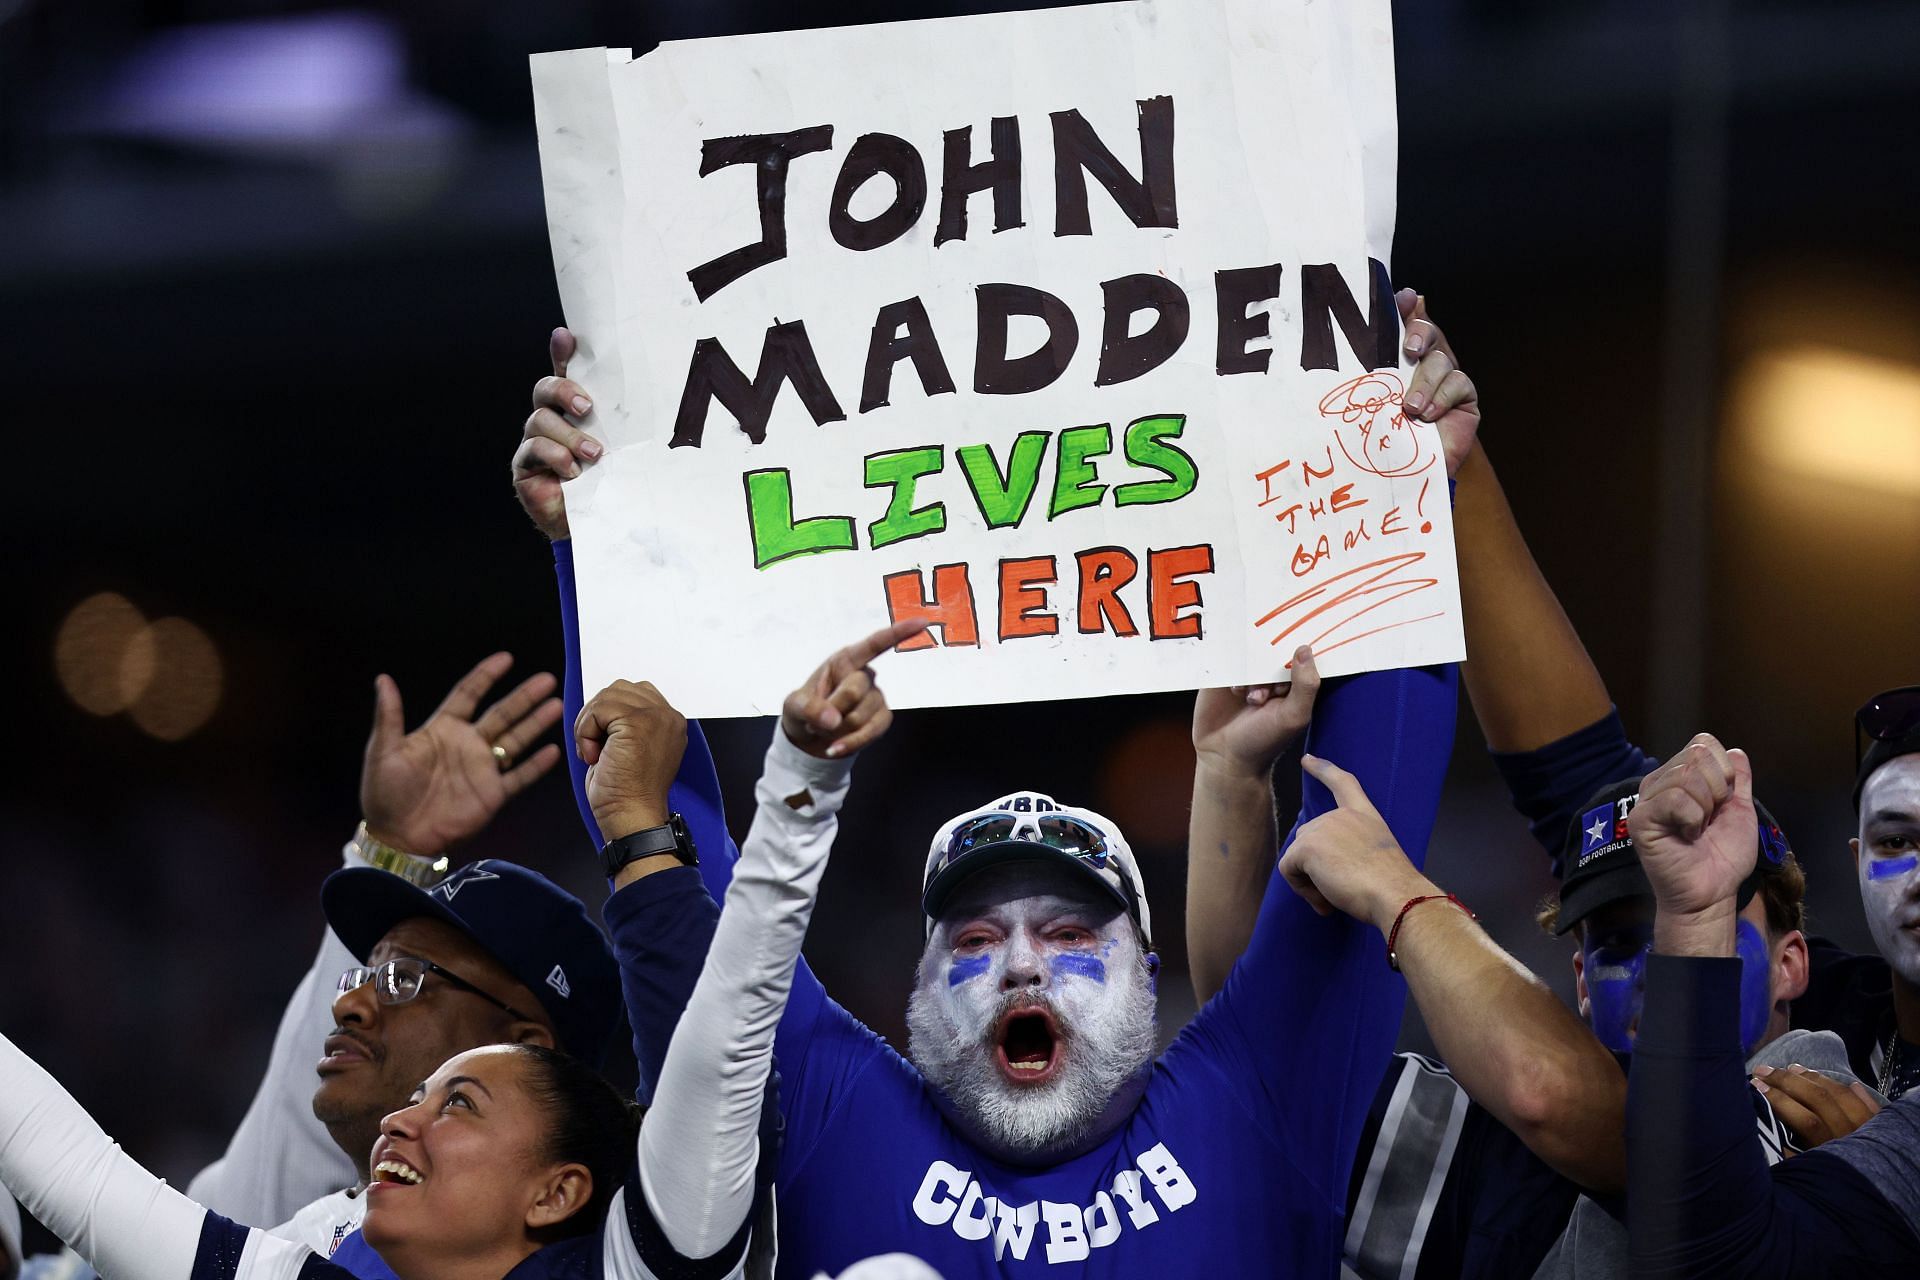 Fans remember John Madden after his passing last year